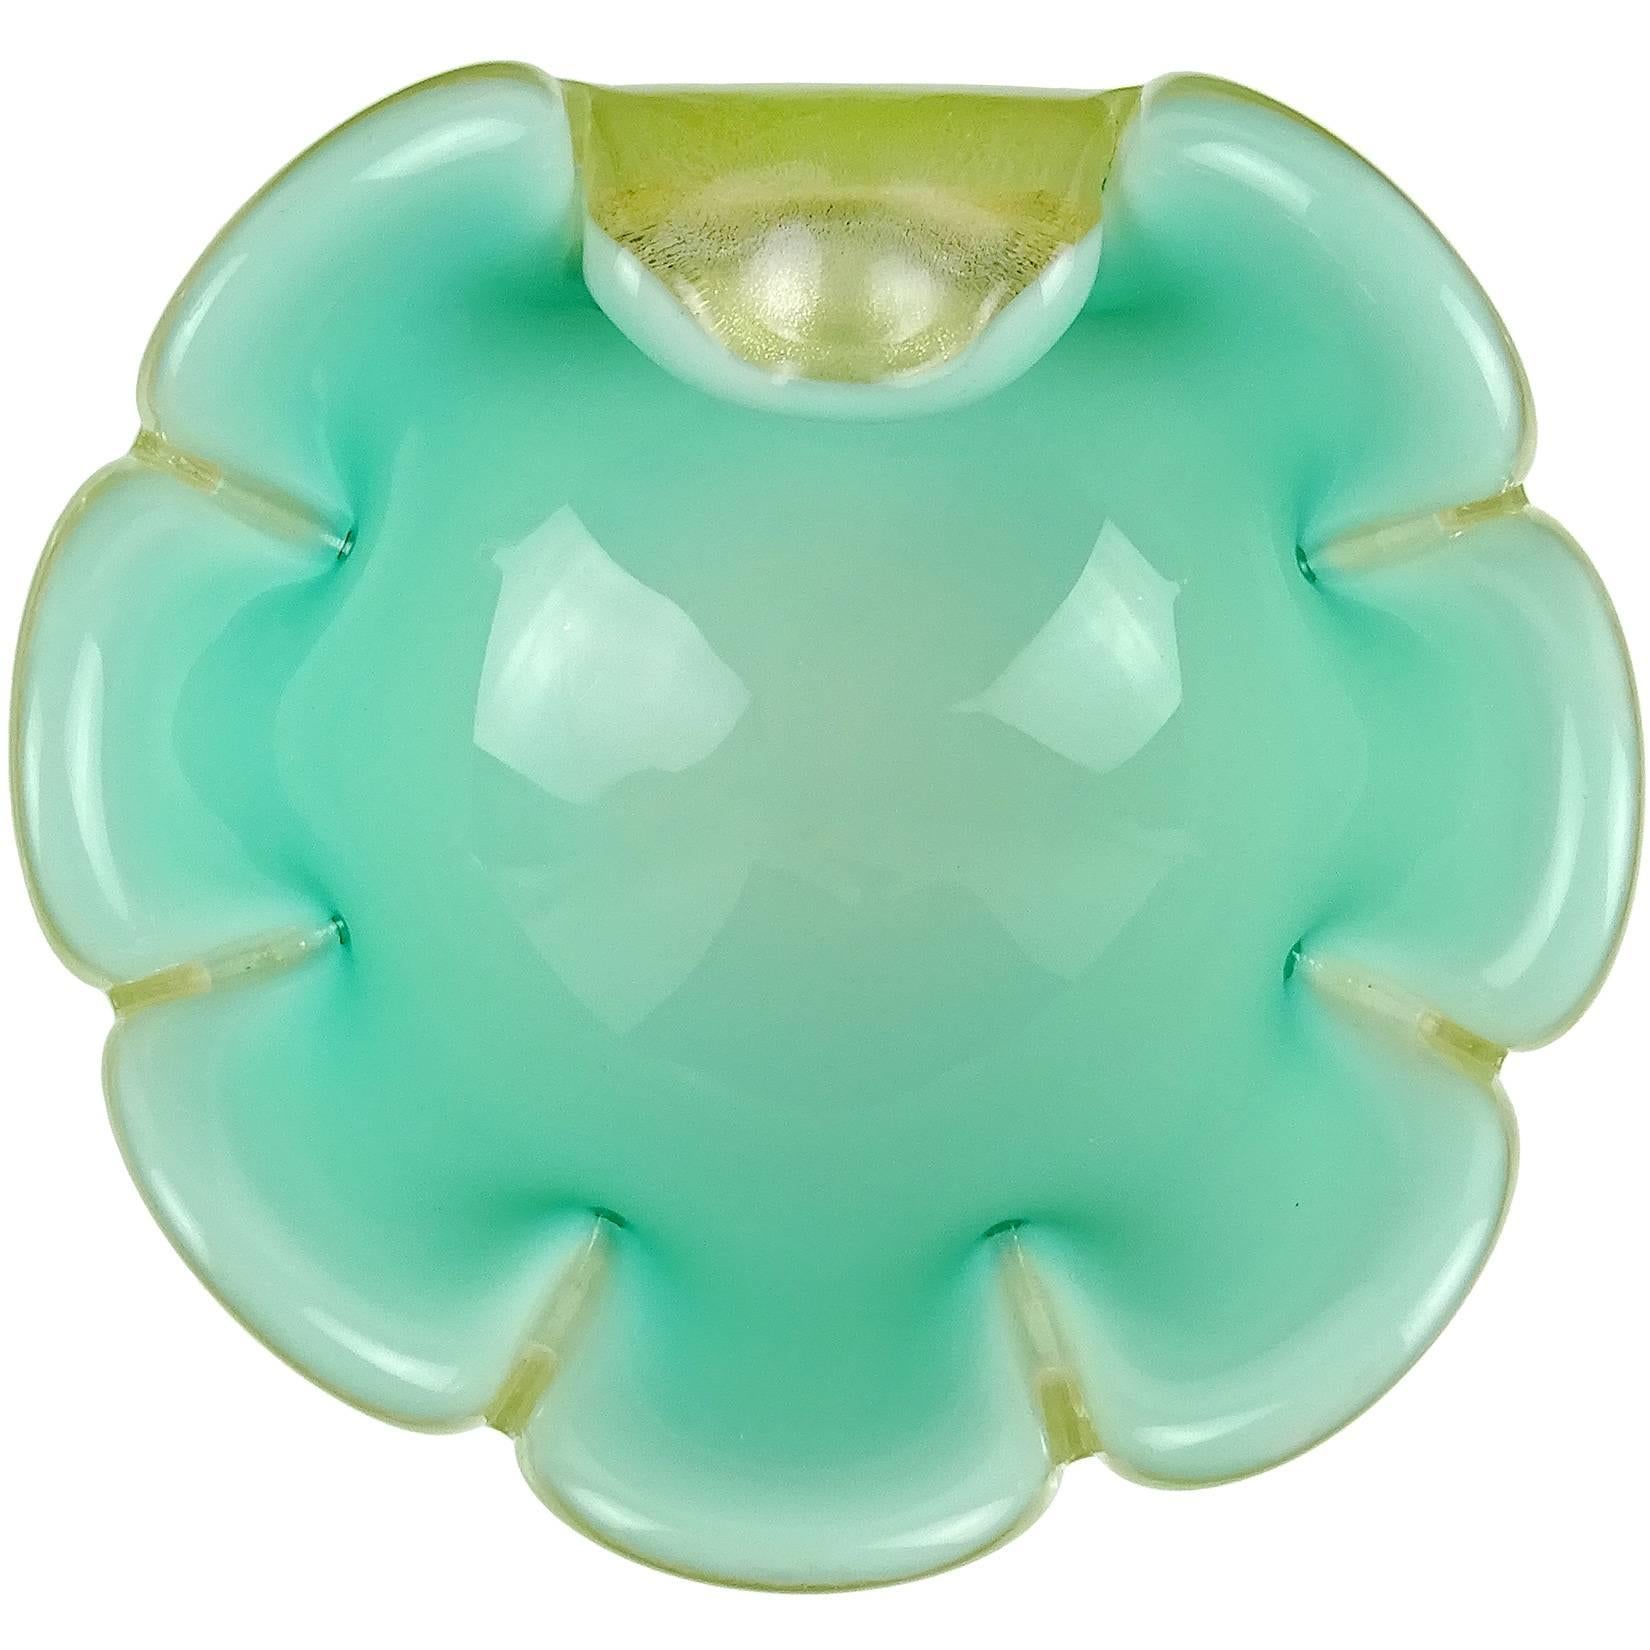 Priced per item (2 bowls available as shown). Beautiful vintage Murano hand blown white and gold flecks over aqua green / celadon Italian art glass scalloped rim bowl. Attributed to designer Archimede Seguso. It has a flower shape, with one petal